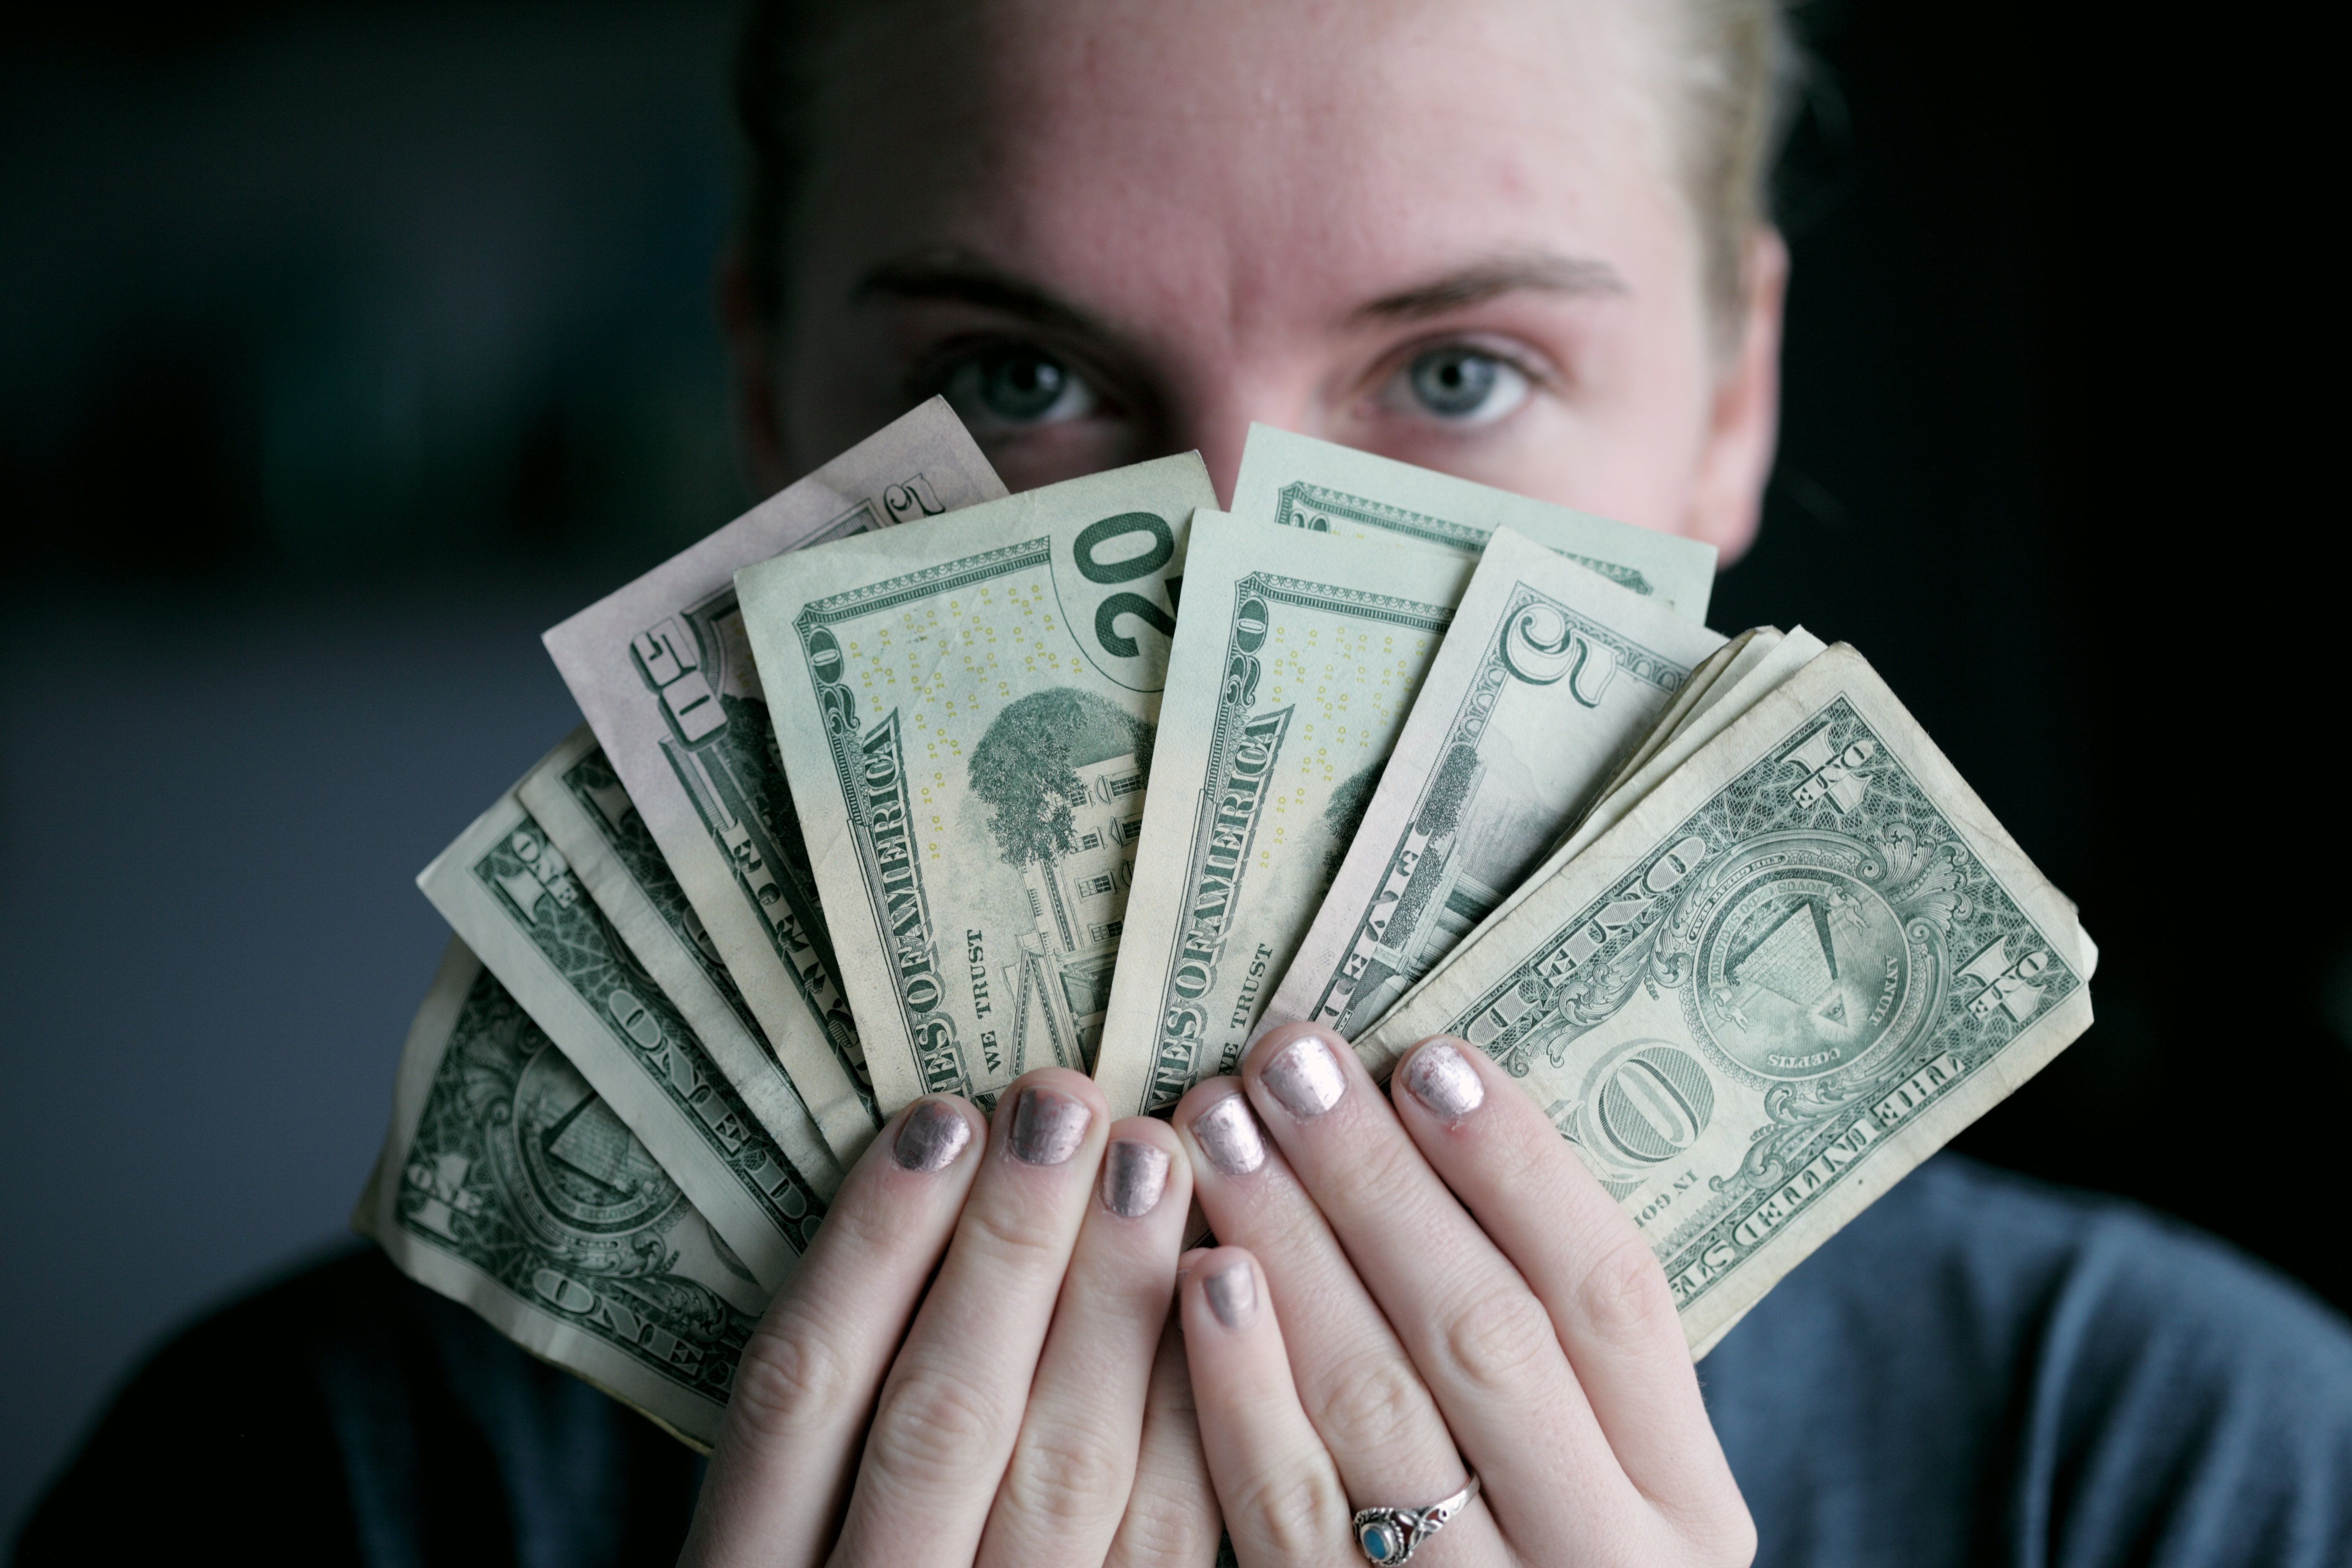 An individual holding money in front of their face. │Source: Unsplash